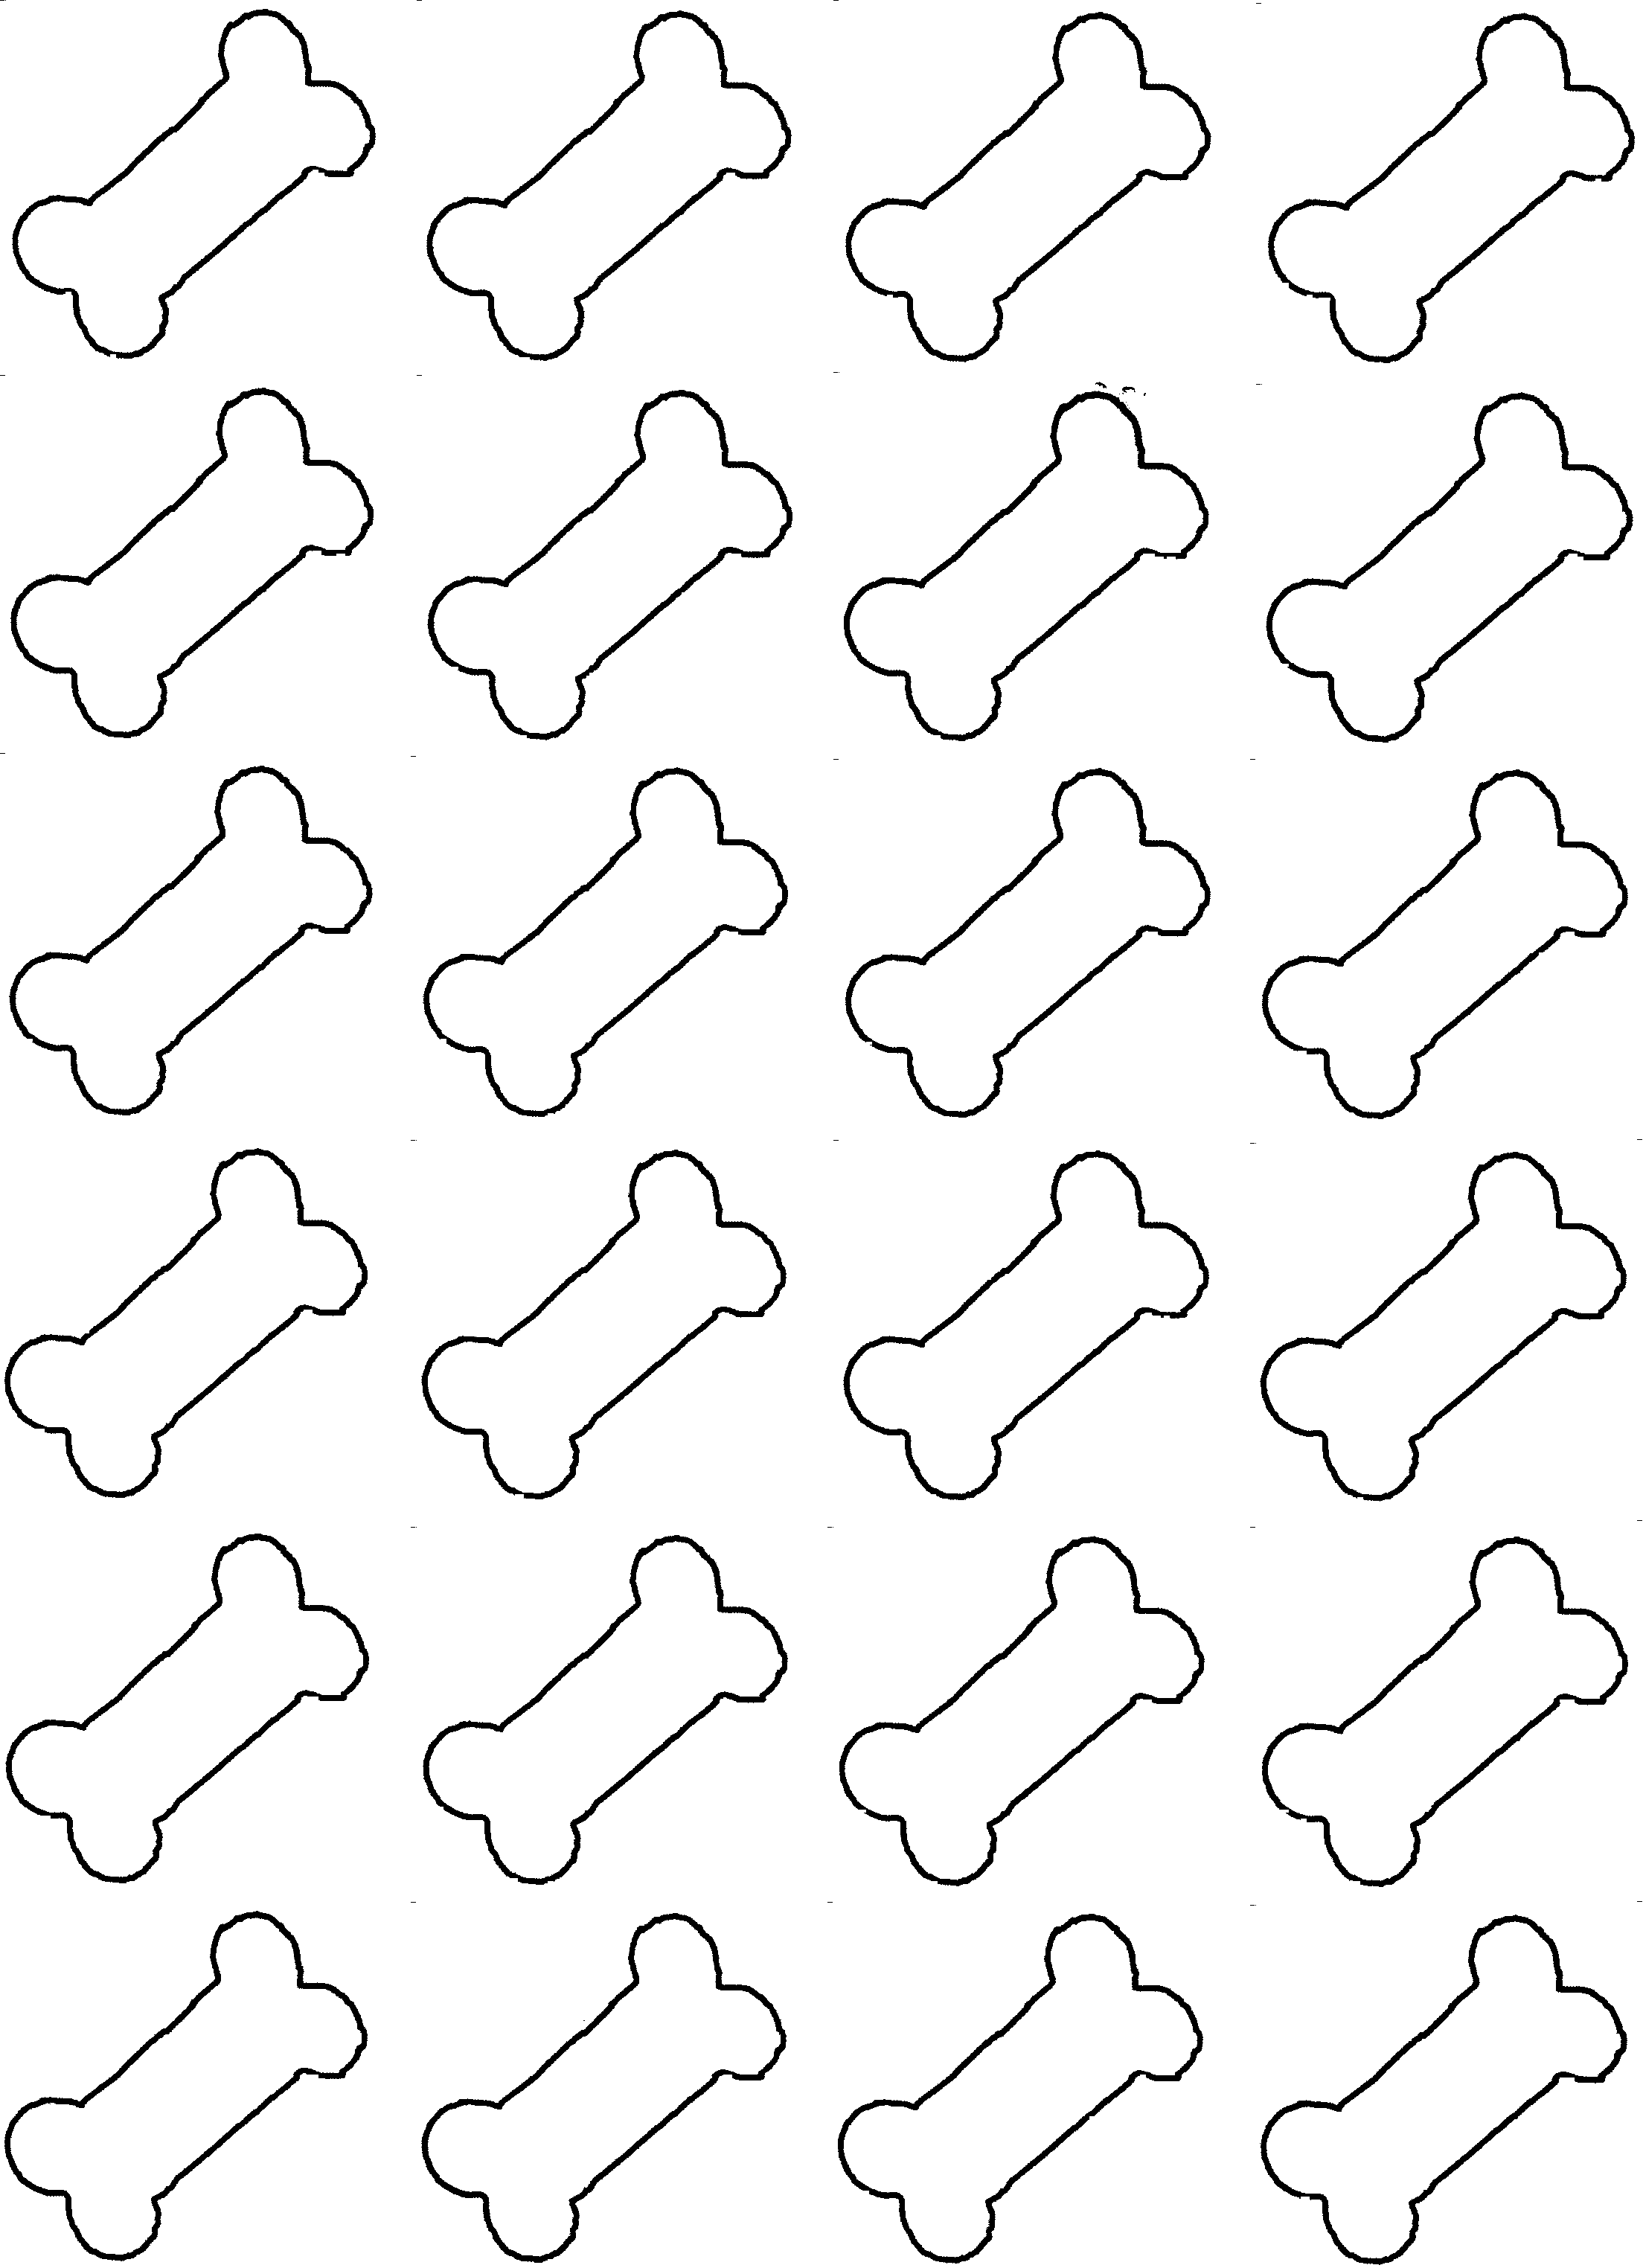 Bone clipart coloring page. Entracing dog bones pages